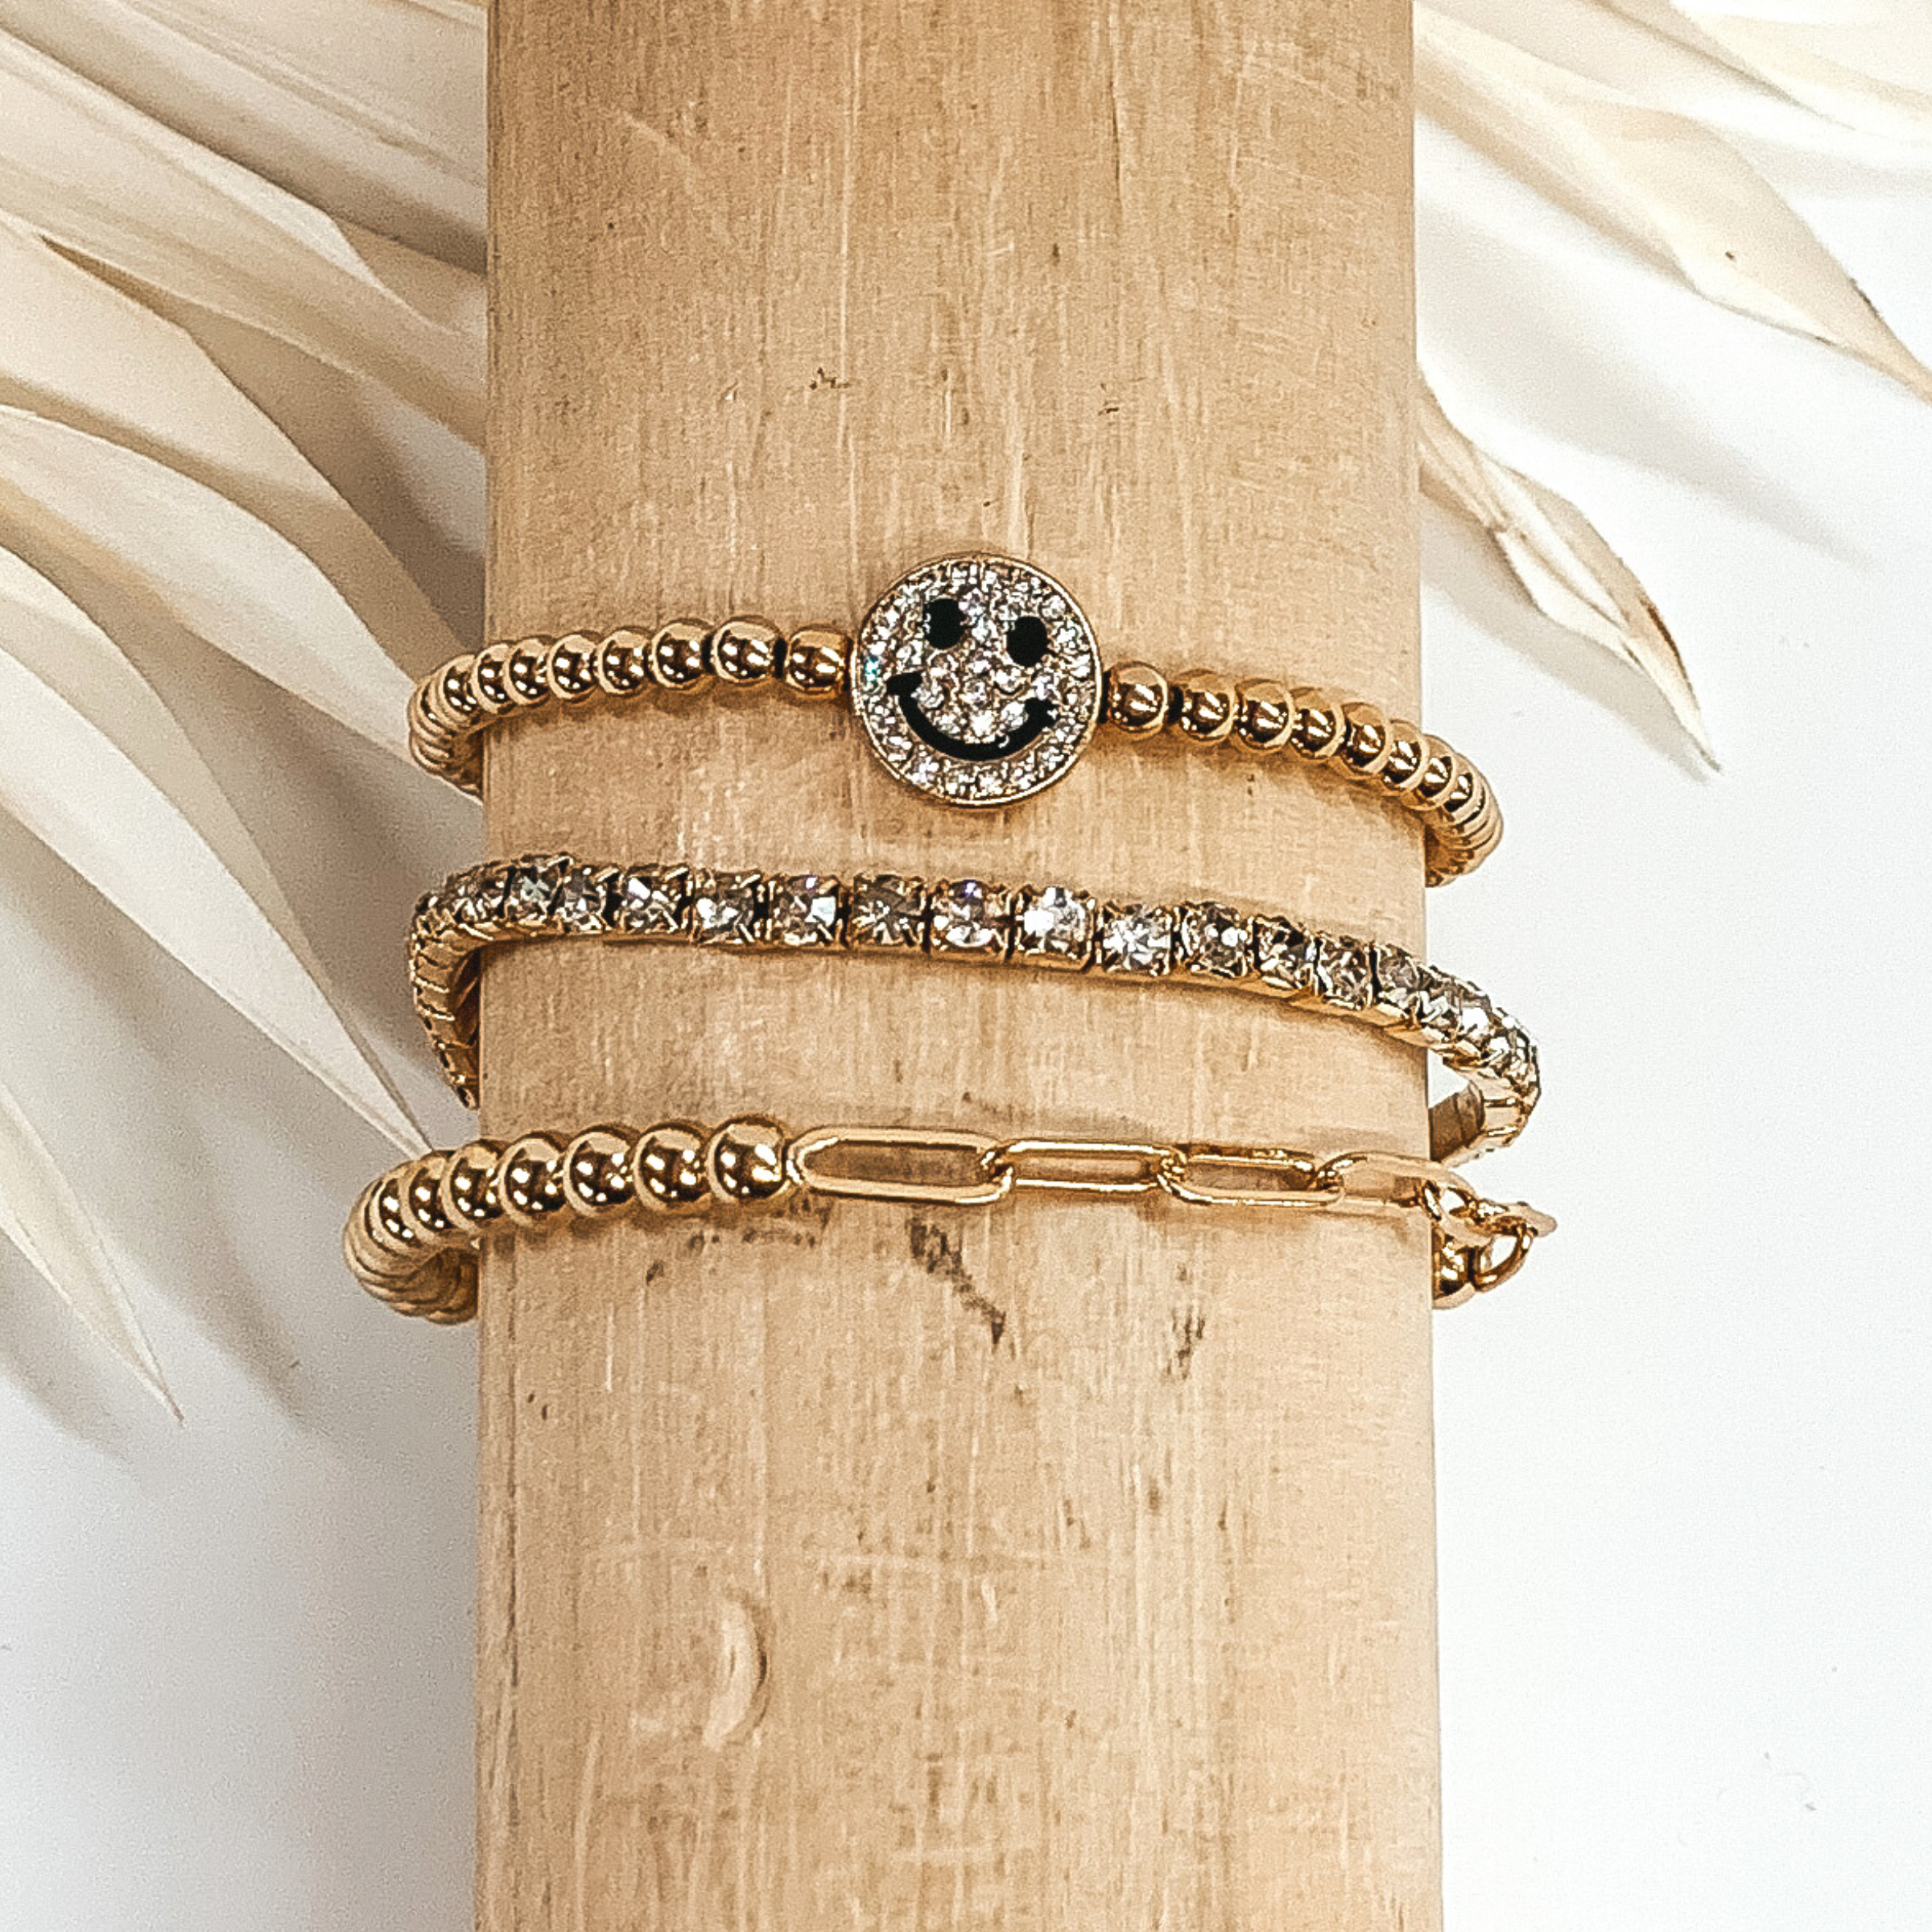 This is a gold bracelet set with a crystal smiley face charm. This set includes a beaded bracelet, a half beaded half chain bracelet, and a clear crystal beaded bracelet. These bracelets are pictured on a wooden bracelet holder on a white background with ivory palm leaves in the background.